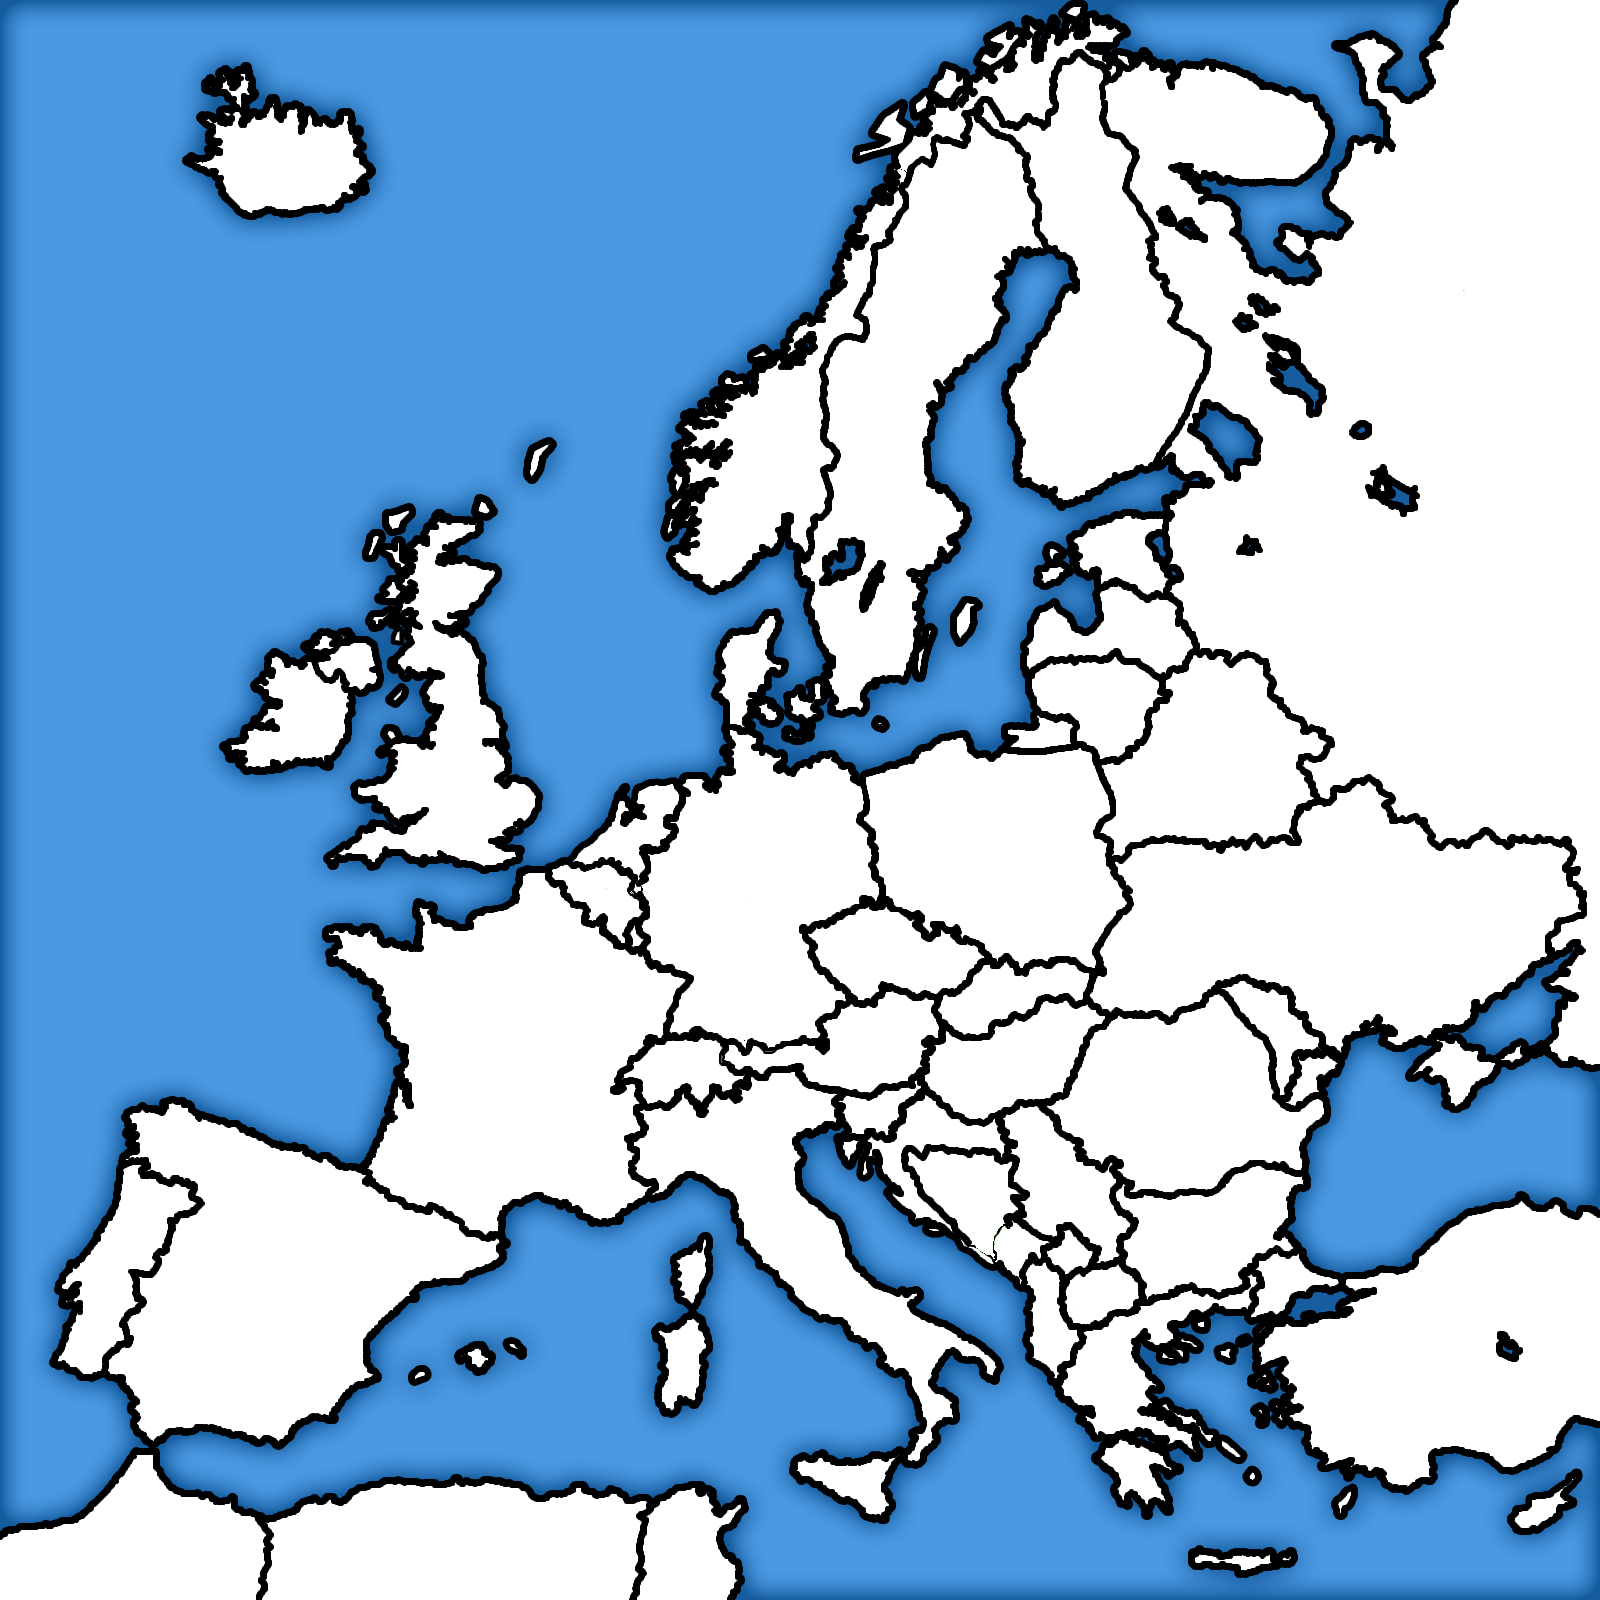 Europe Map | OpenGameArt.org